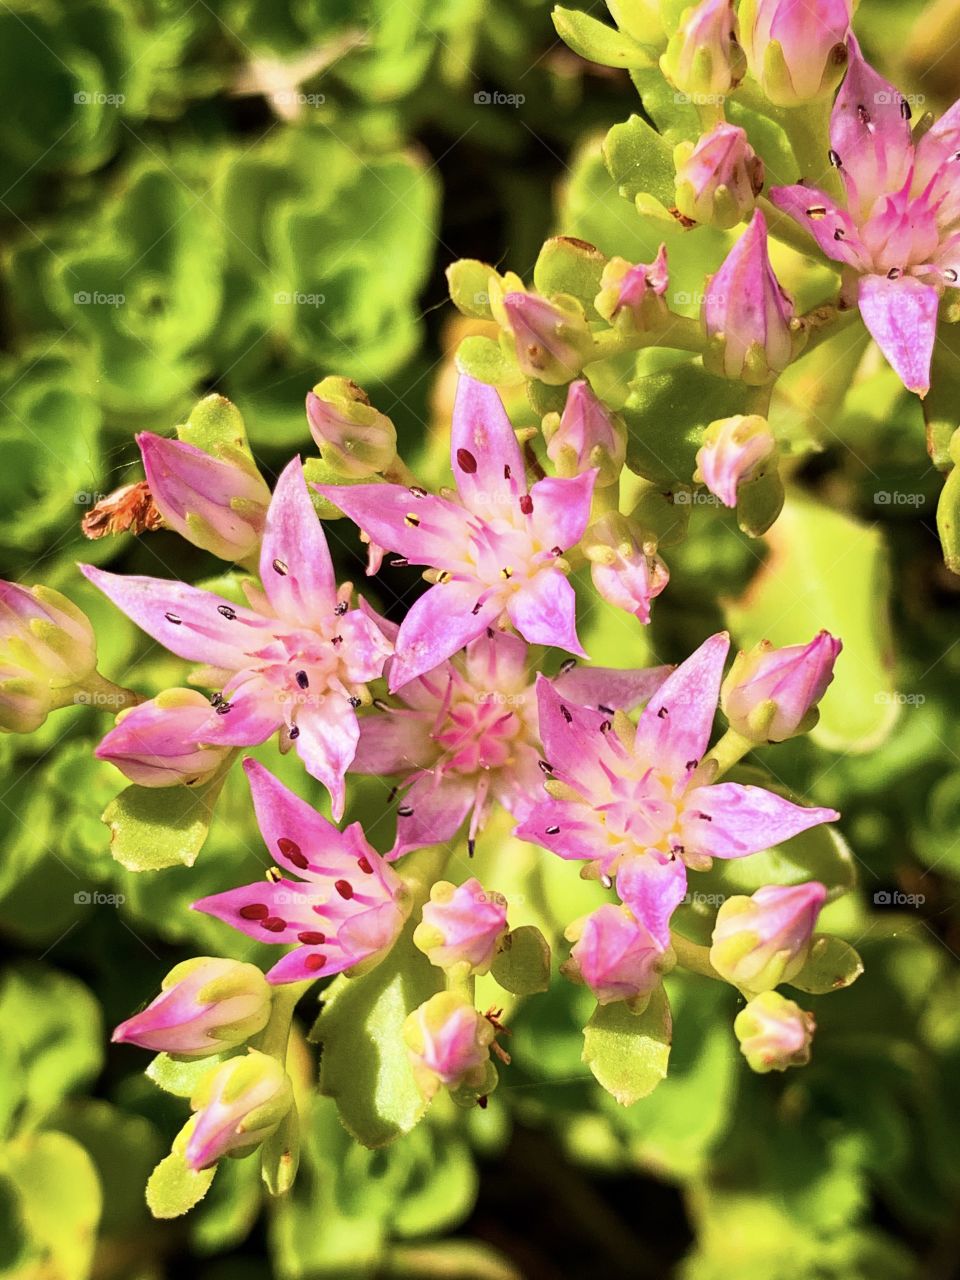 A lovely pink stonecrop flower blooms with tiny blossoms and pretty green foliage.